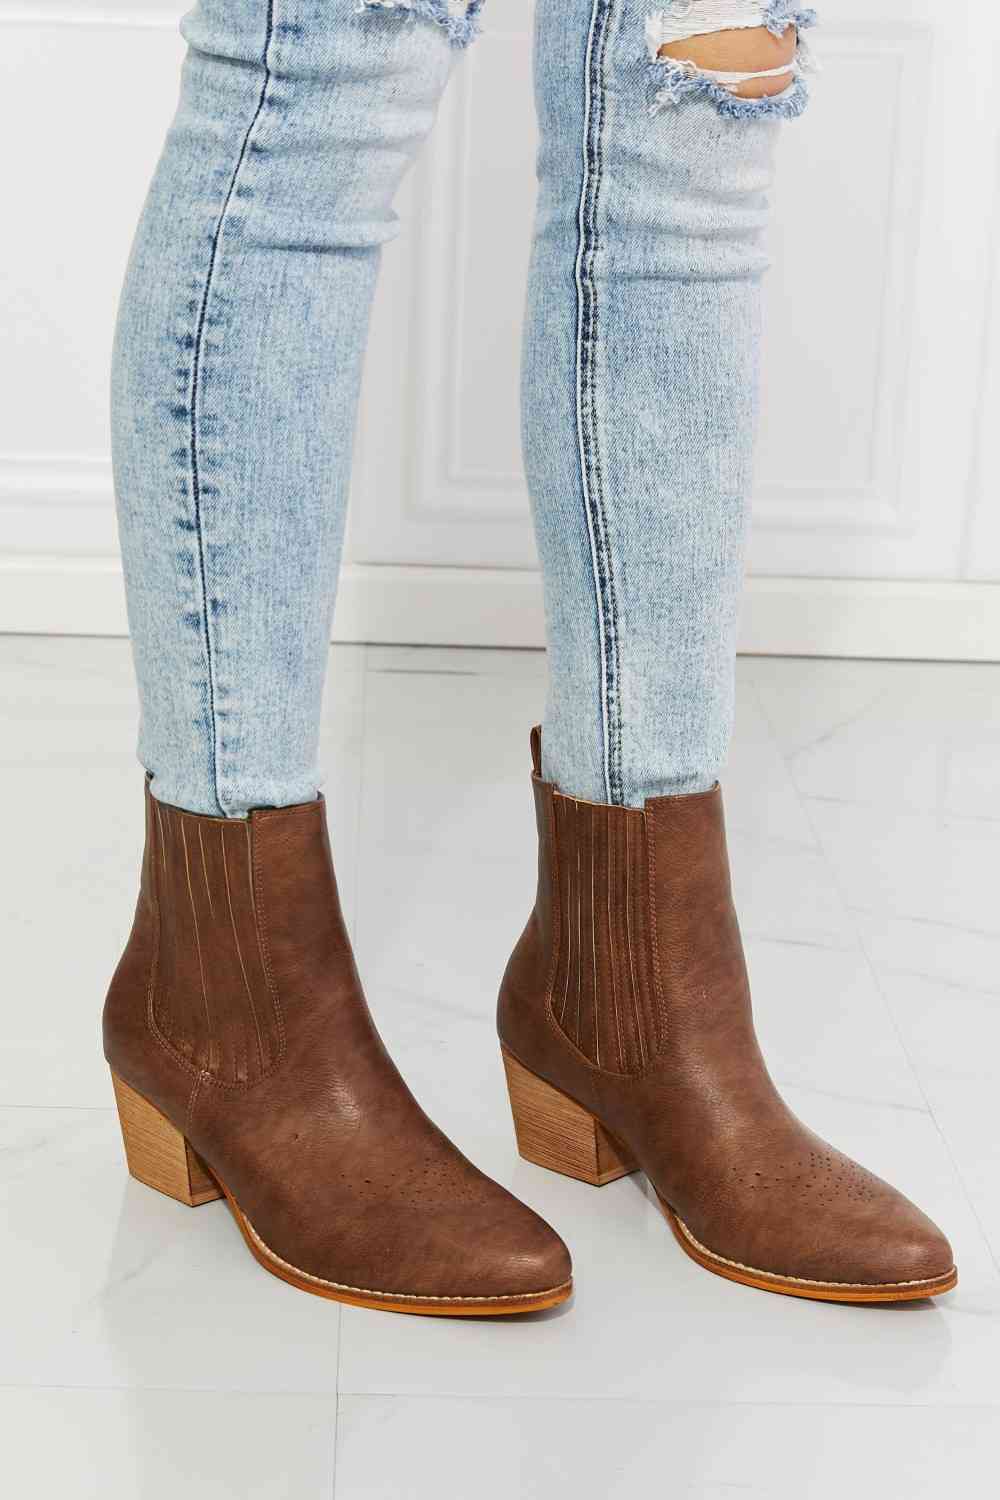 Love the Journey Stacked Heel Chelsea Boot in Chestnut - Chestnut / 6 - Accessories - Shoes - 1 - 2024